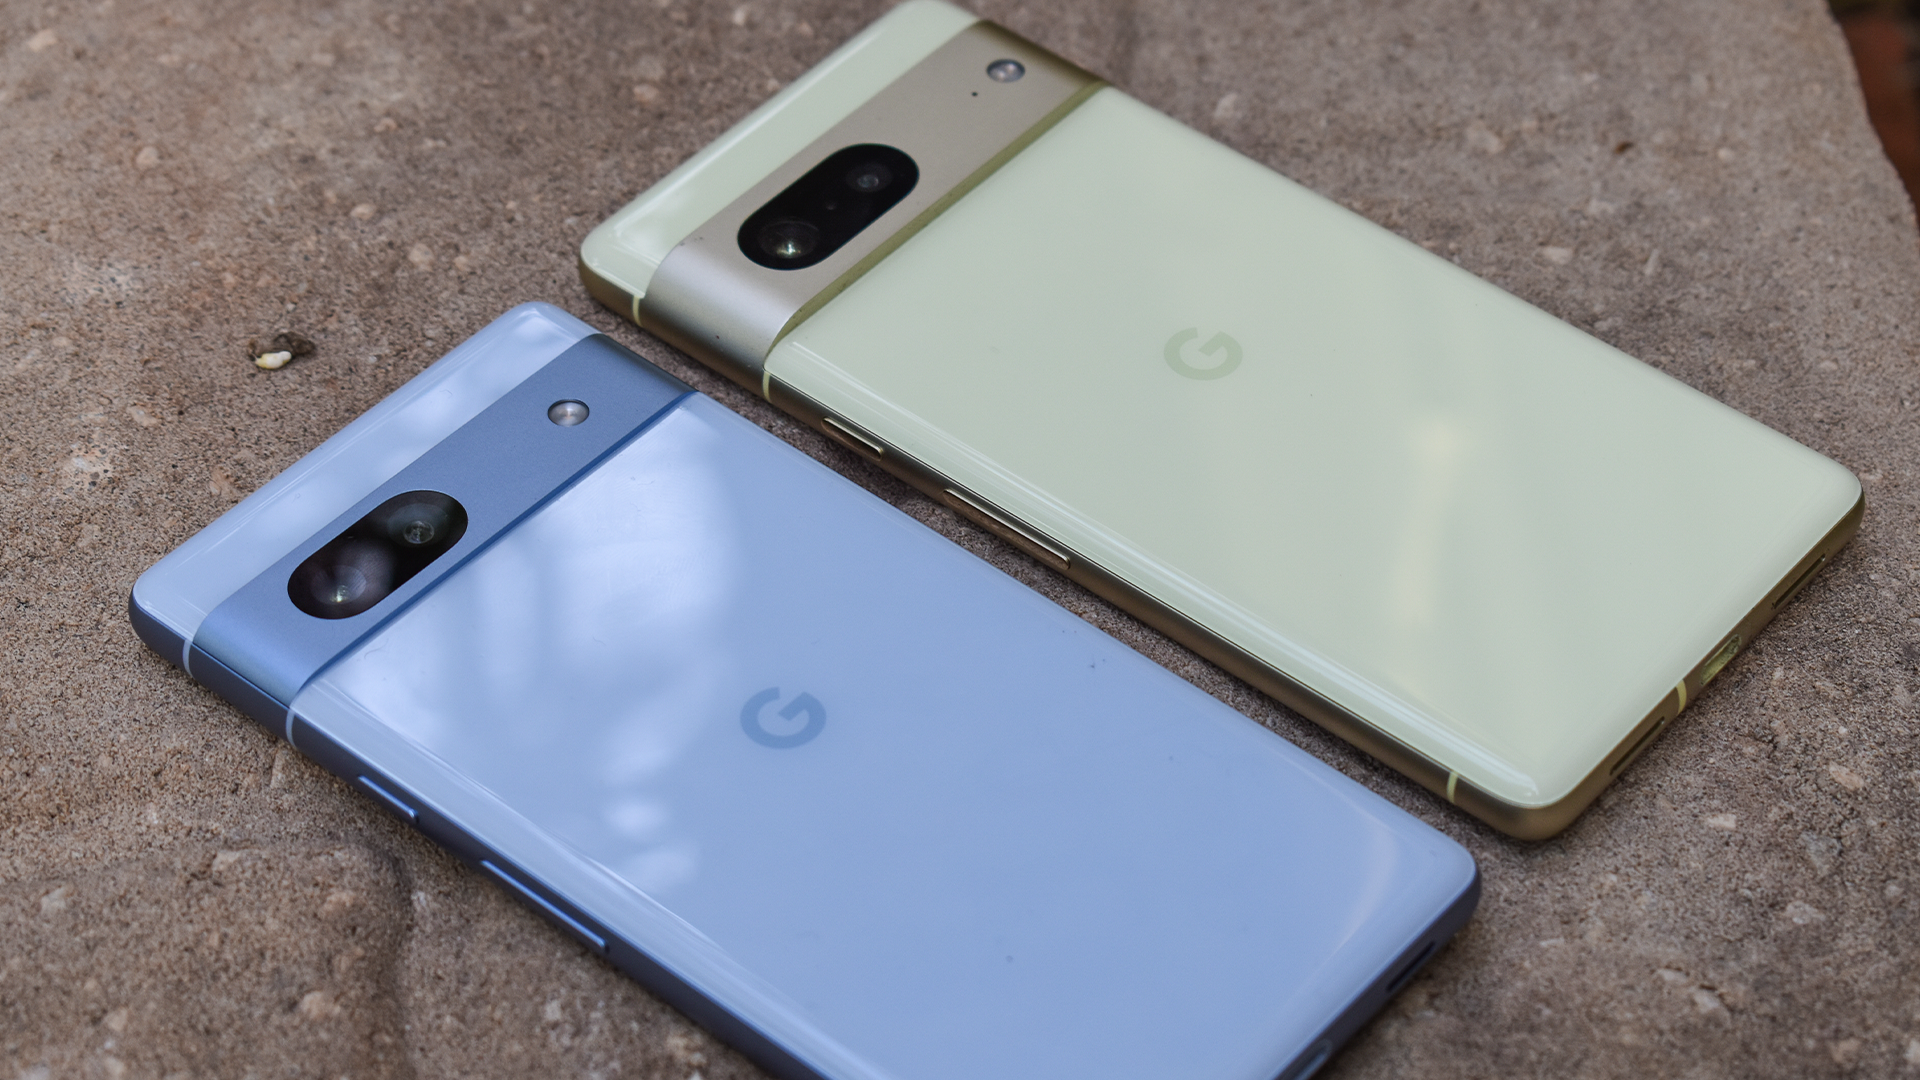 The Google Pixel 7a and Pixel 7 sitting together.